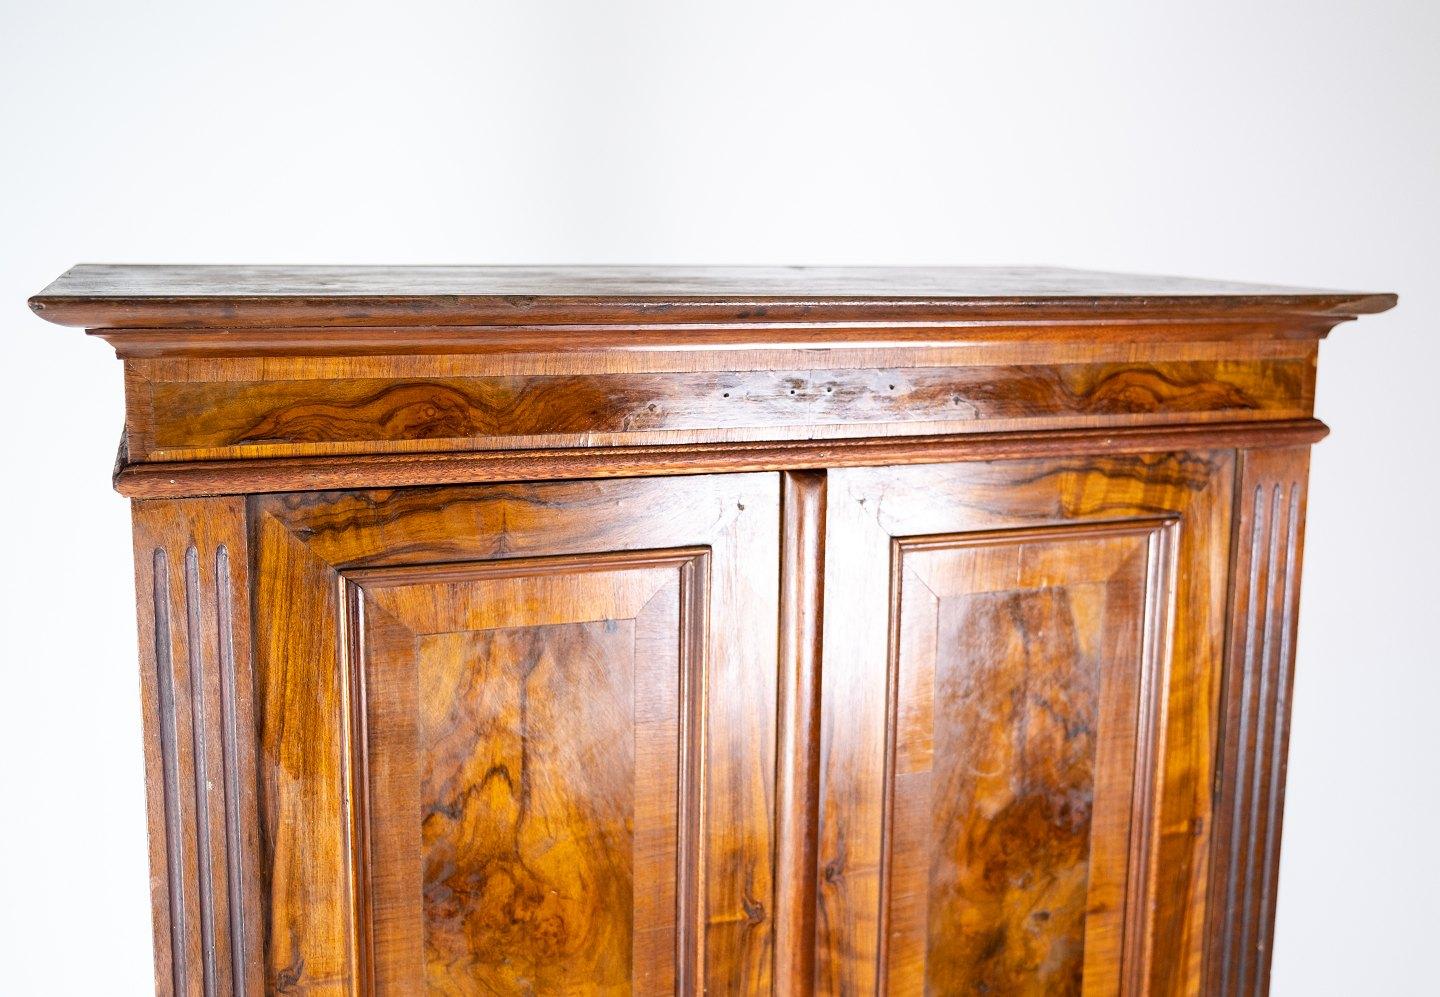 Danish Cabinet of Walnut, in Great Antique Condition from the 1880s